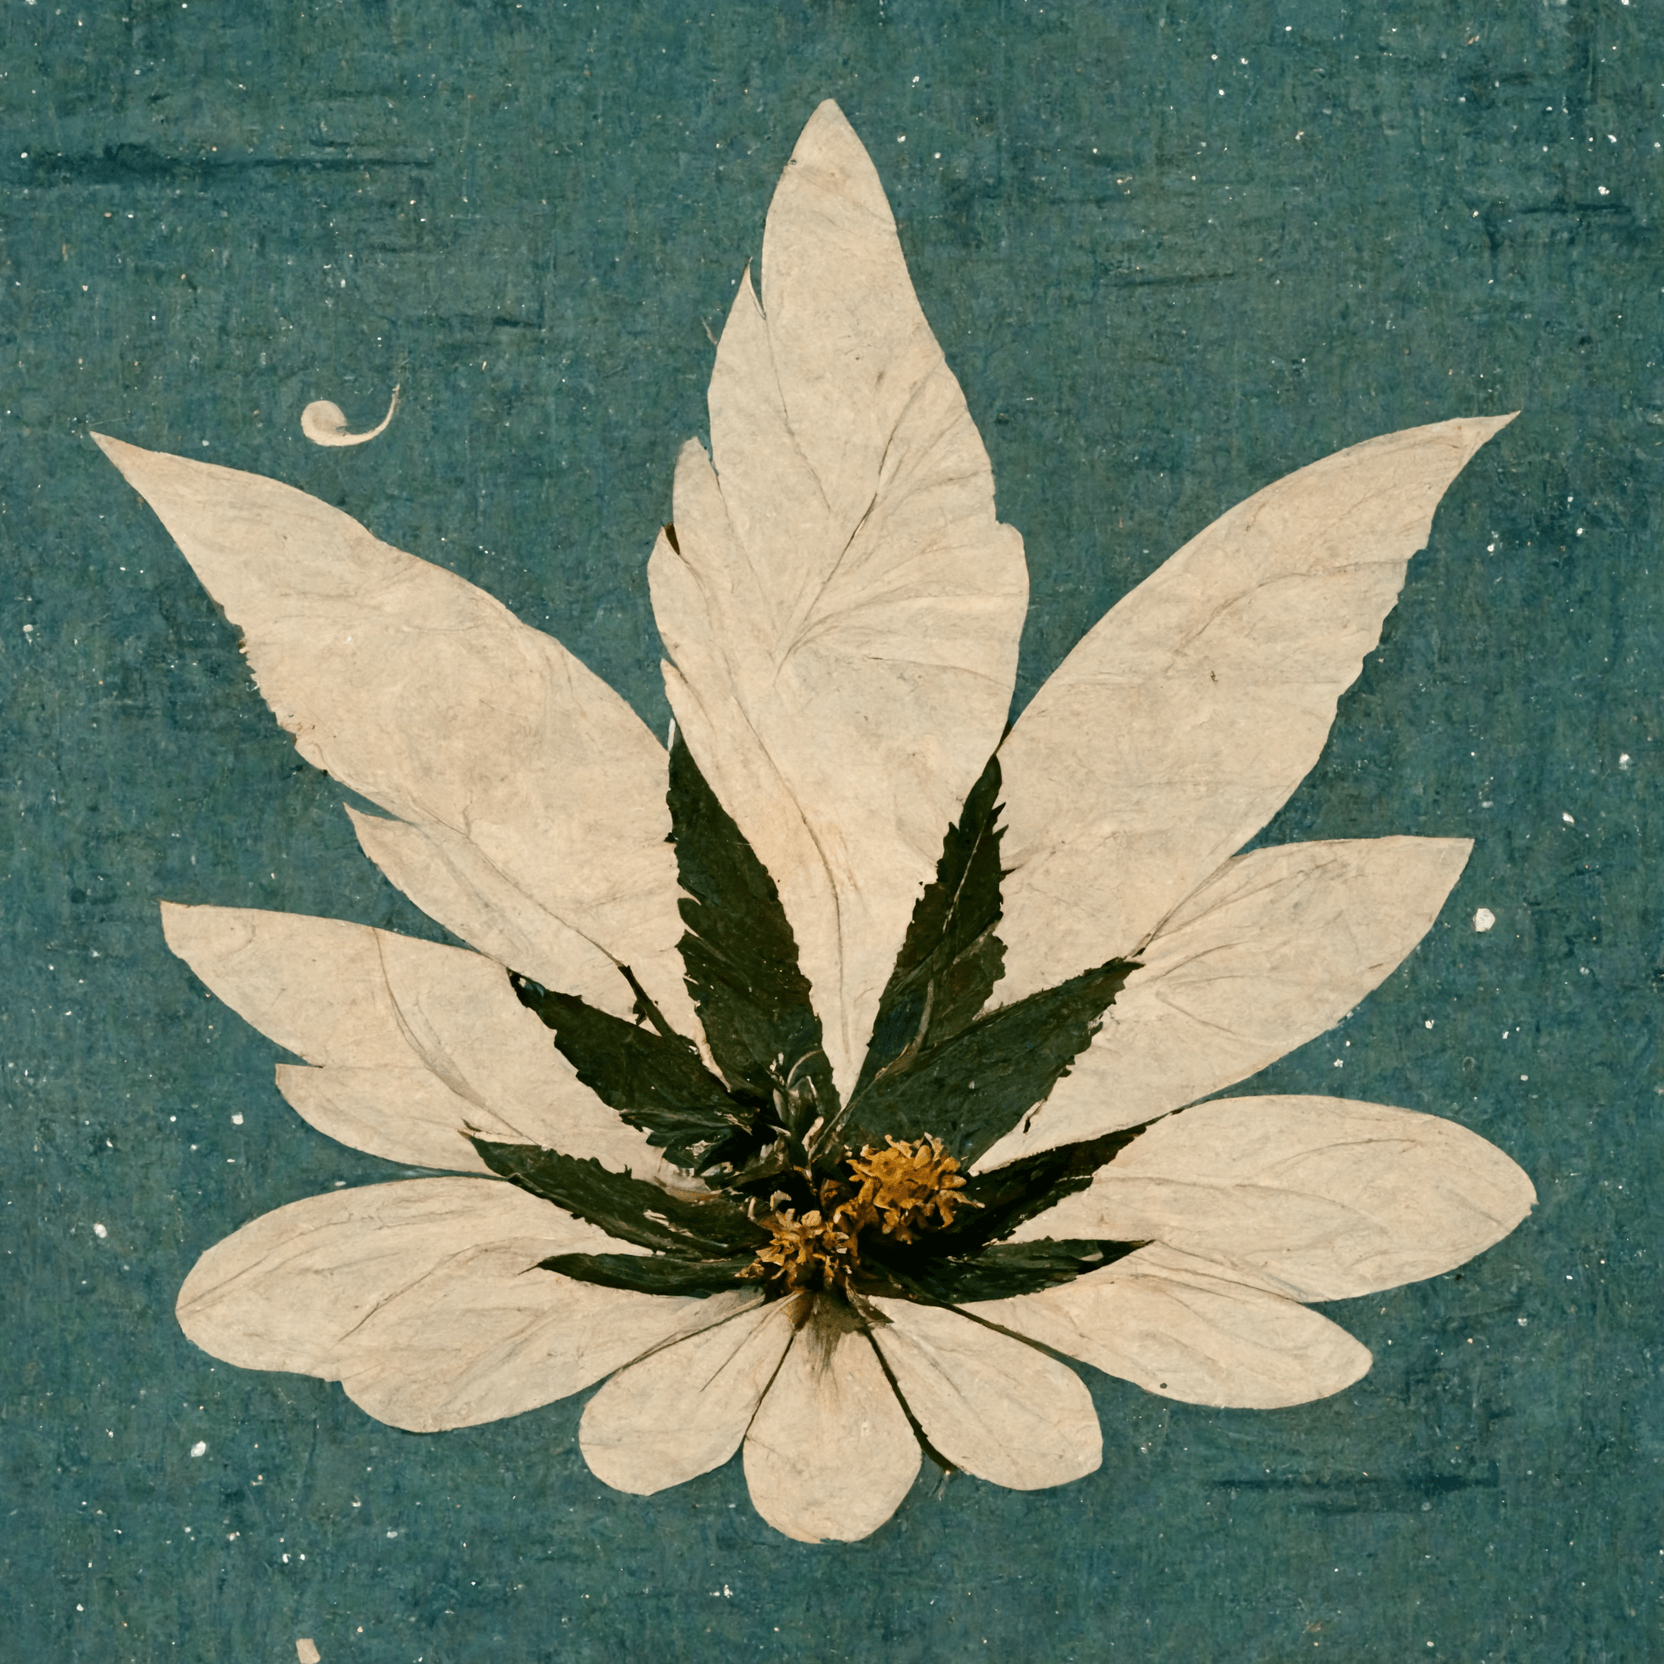 Cannabis Botanical Illustration in the style of Winslow Homer - Goldleaf